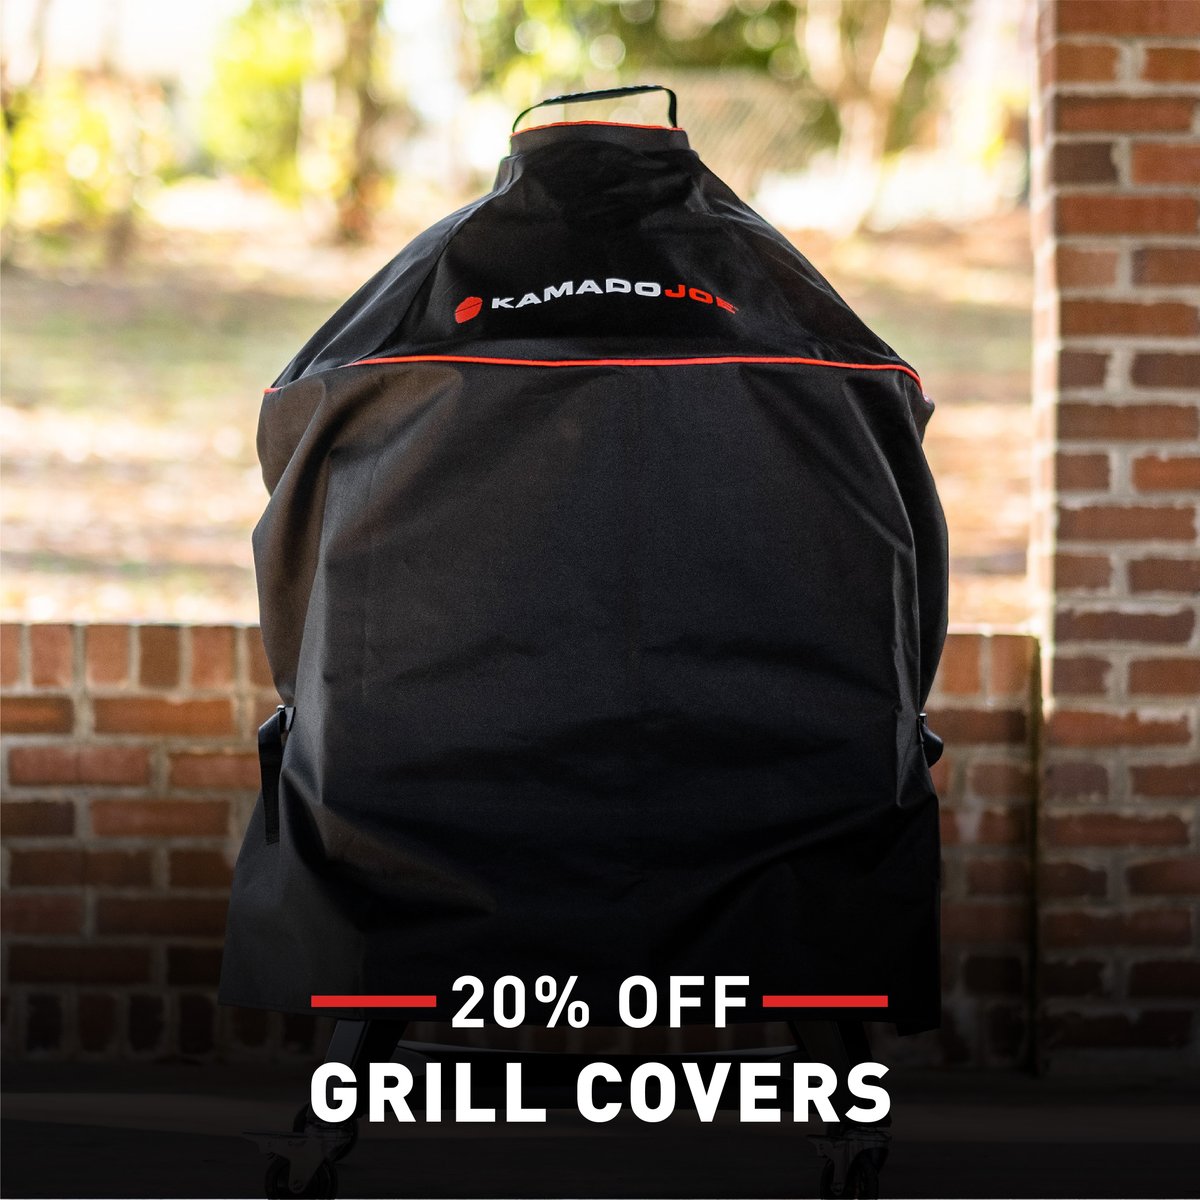 Get ready to fire up the savings!🔥🎉 Don't miss out on our Spring Black Friday Sale! Score 10% off the Classic Joe - Series I and 20% off the Big Joe - Series I. Plus, enjoy 20% off Grill Covers! Hurry, these deals end on April 30th! Shop the sale: bit.ly/3VGvJcZ